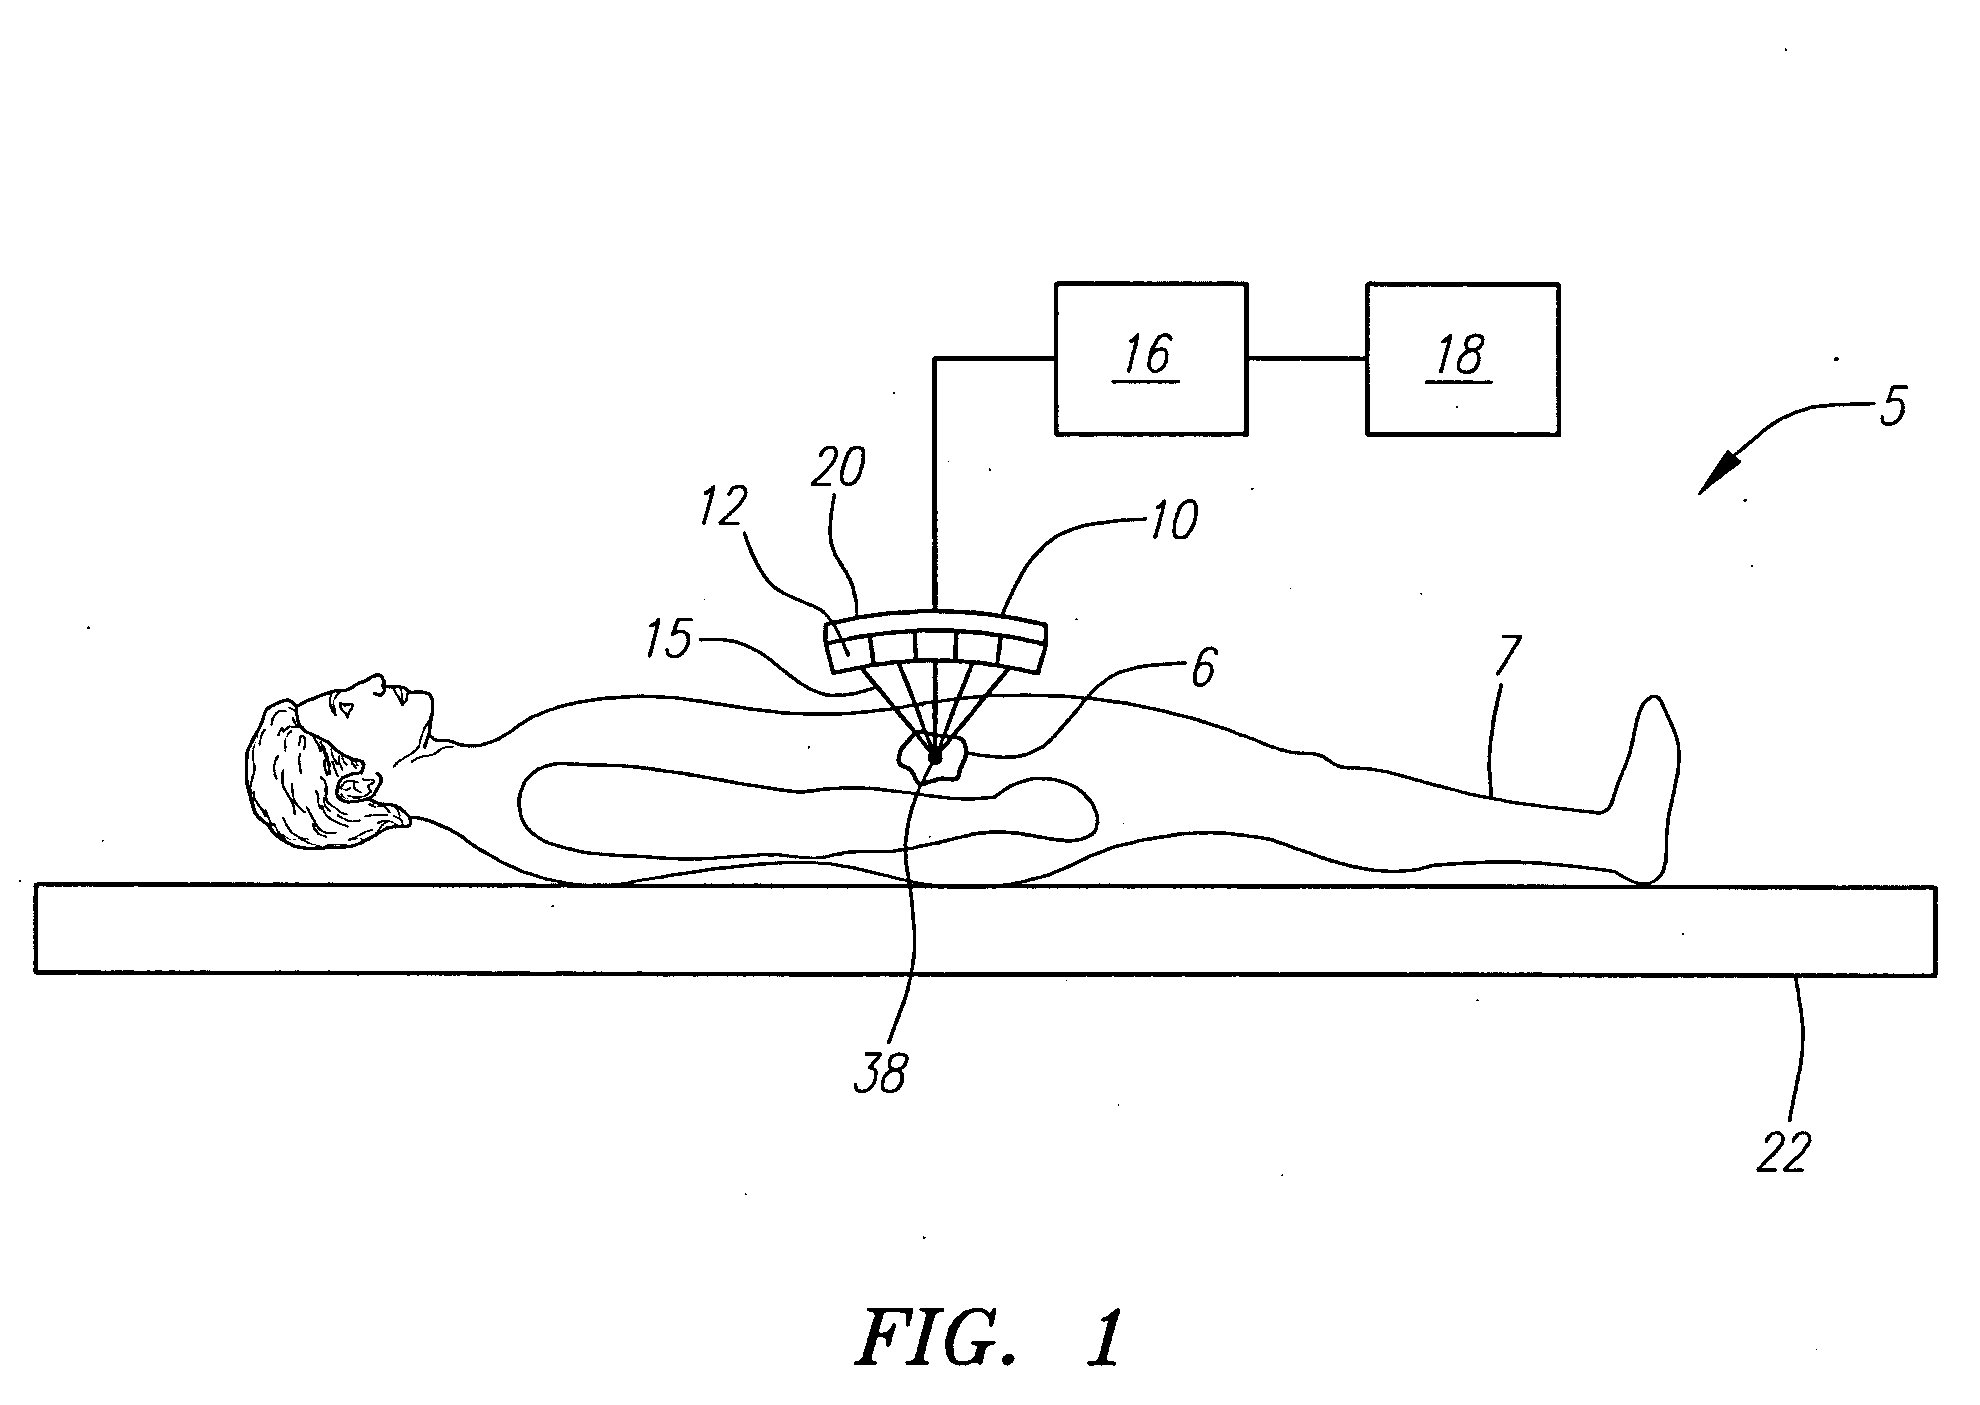 Focused ultrasound system with adaptive anatomical aperture shaping